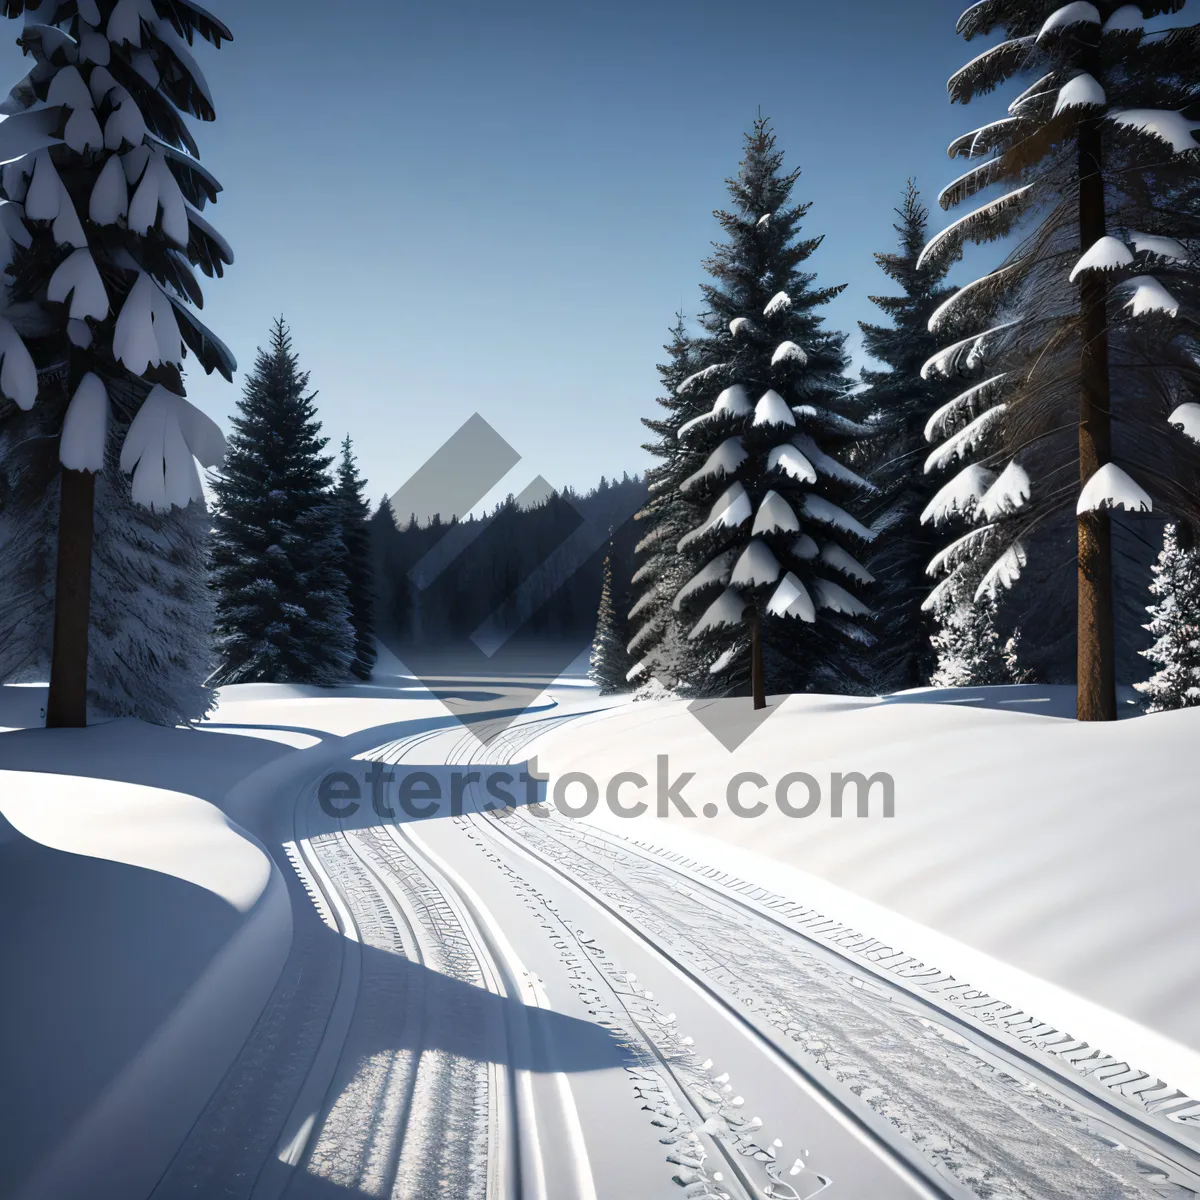 Picture of Snowy Mountain Landscape with Pine Trees